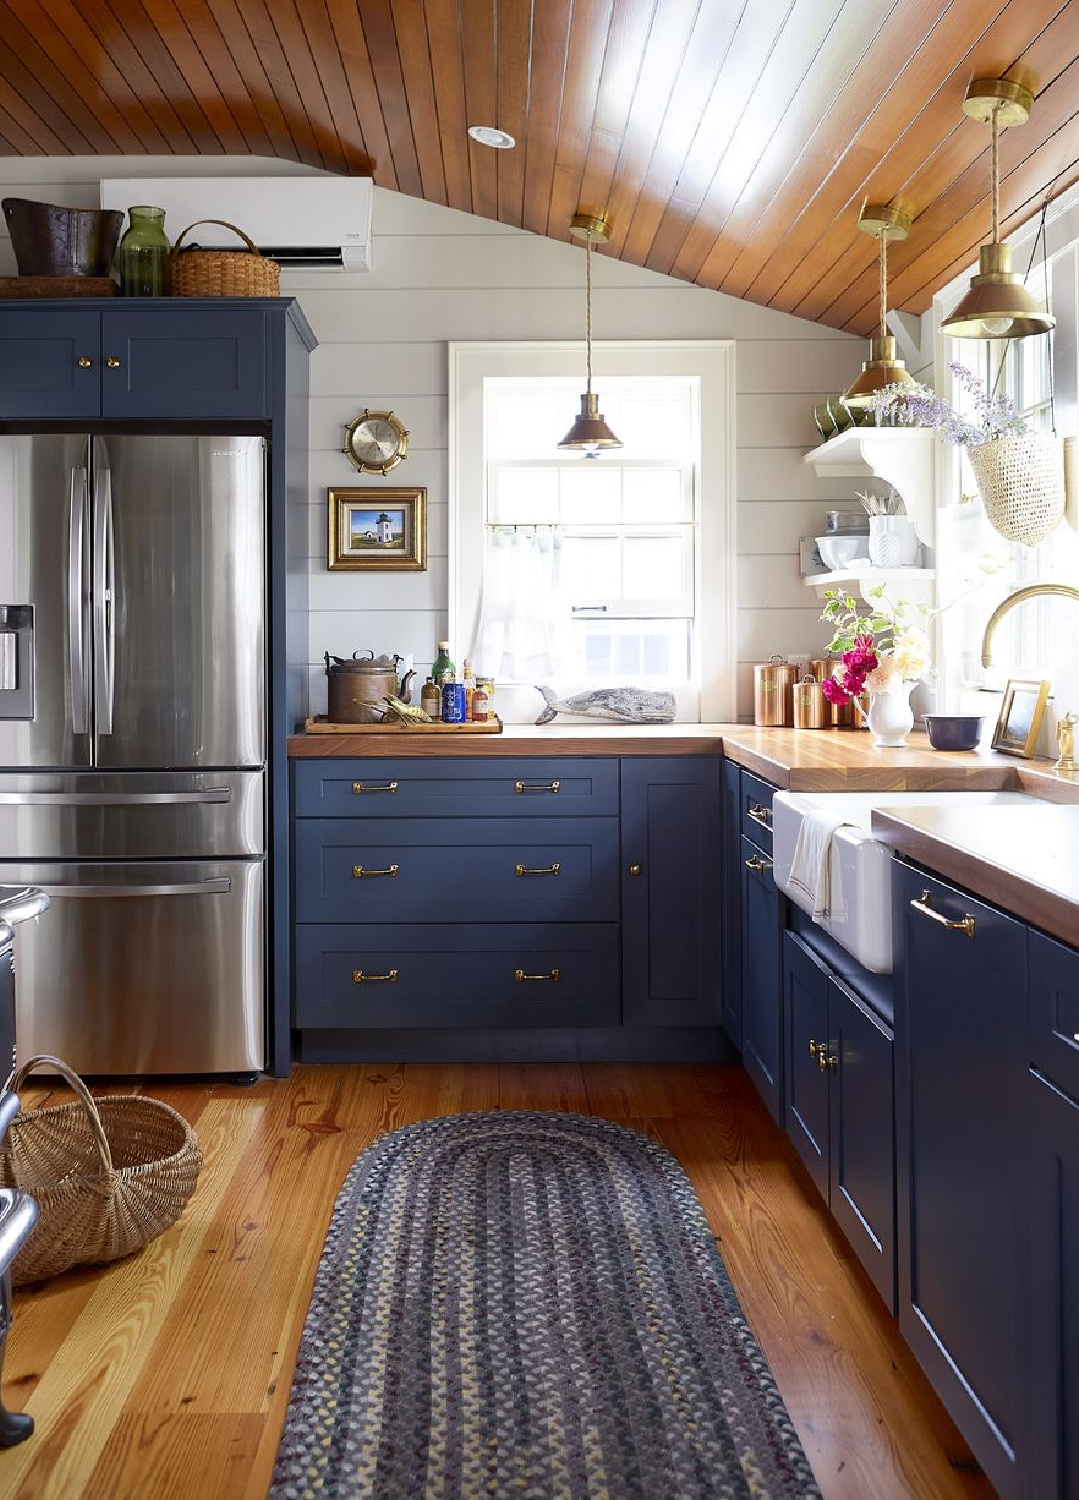 Sherwin Williams SALTY DOG blue kitchen cabinets in Country Living. 